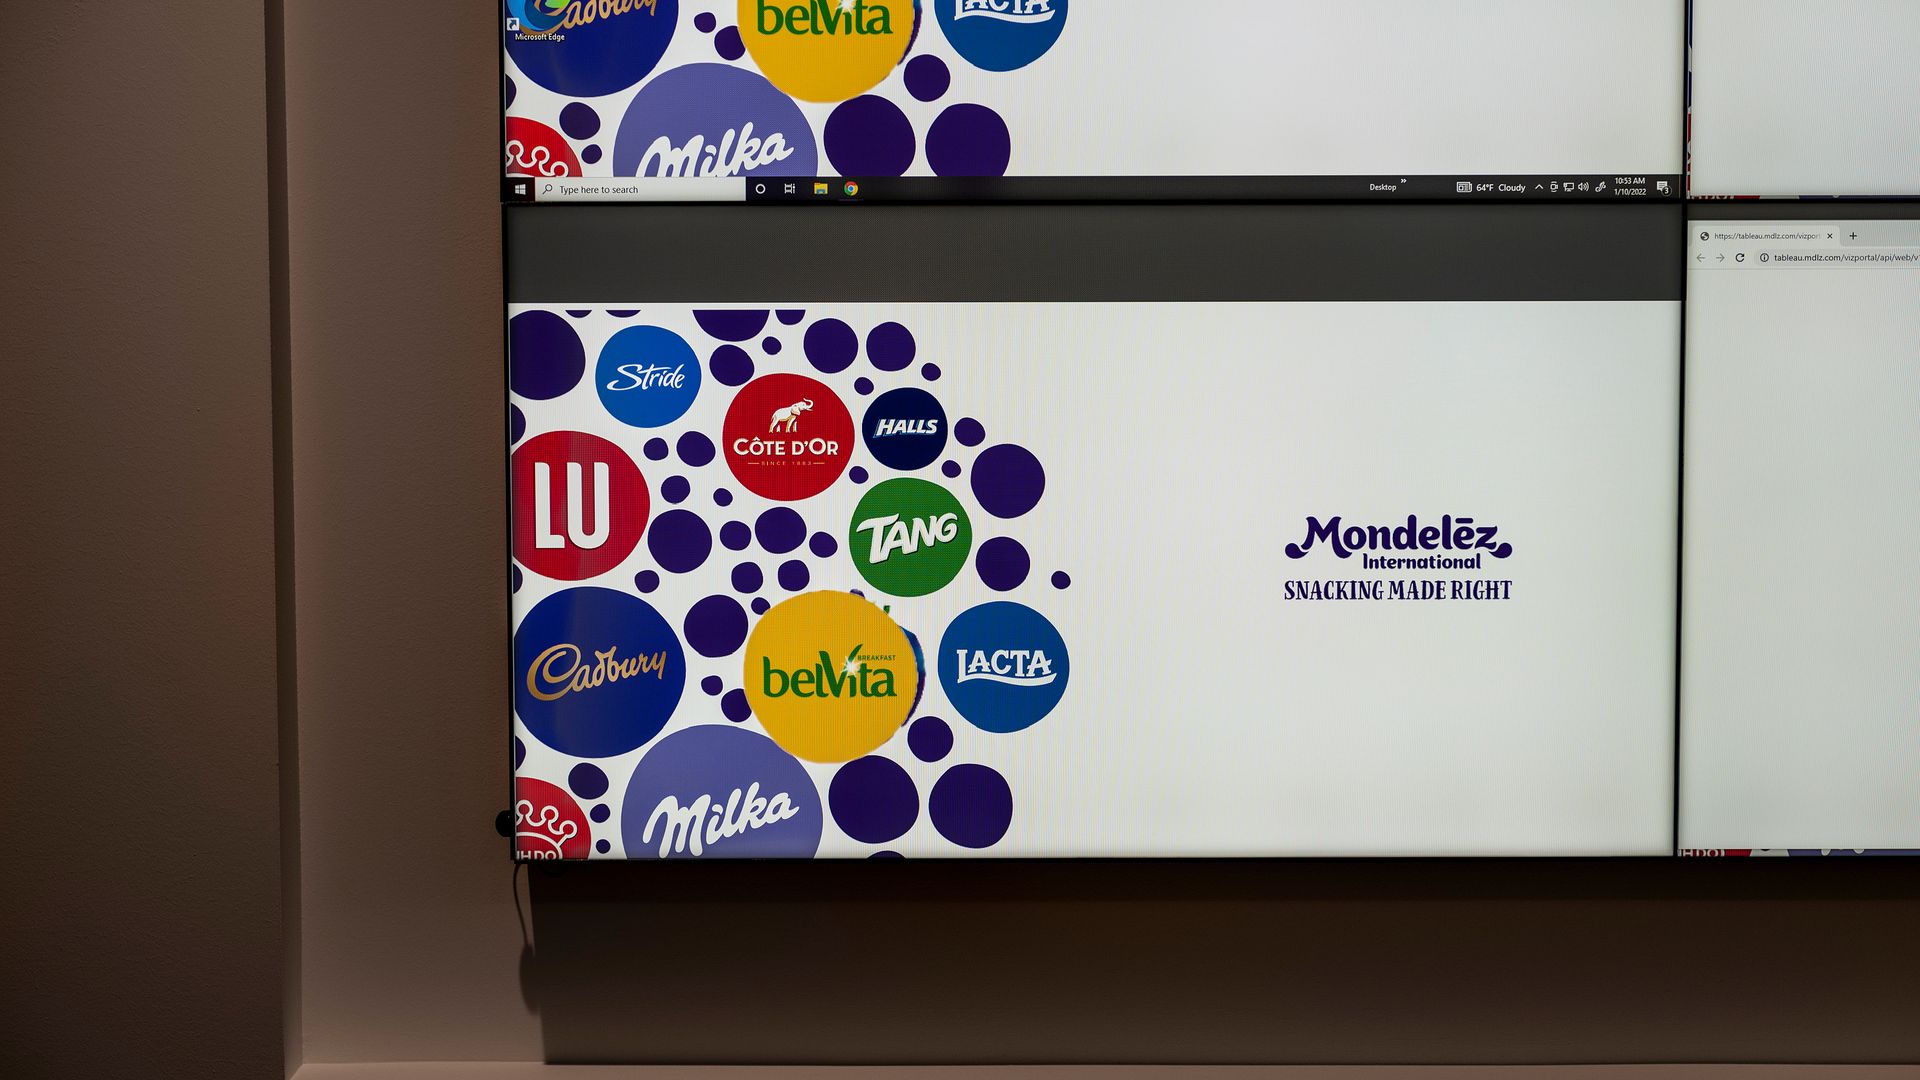 The Mondelez name appears on a screen alongside the names of many of the brands it owns.